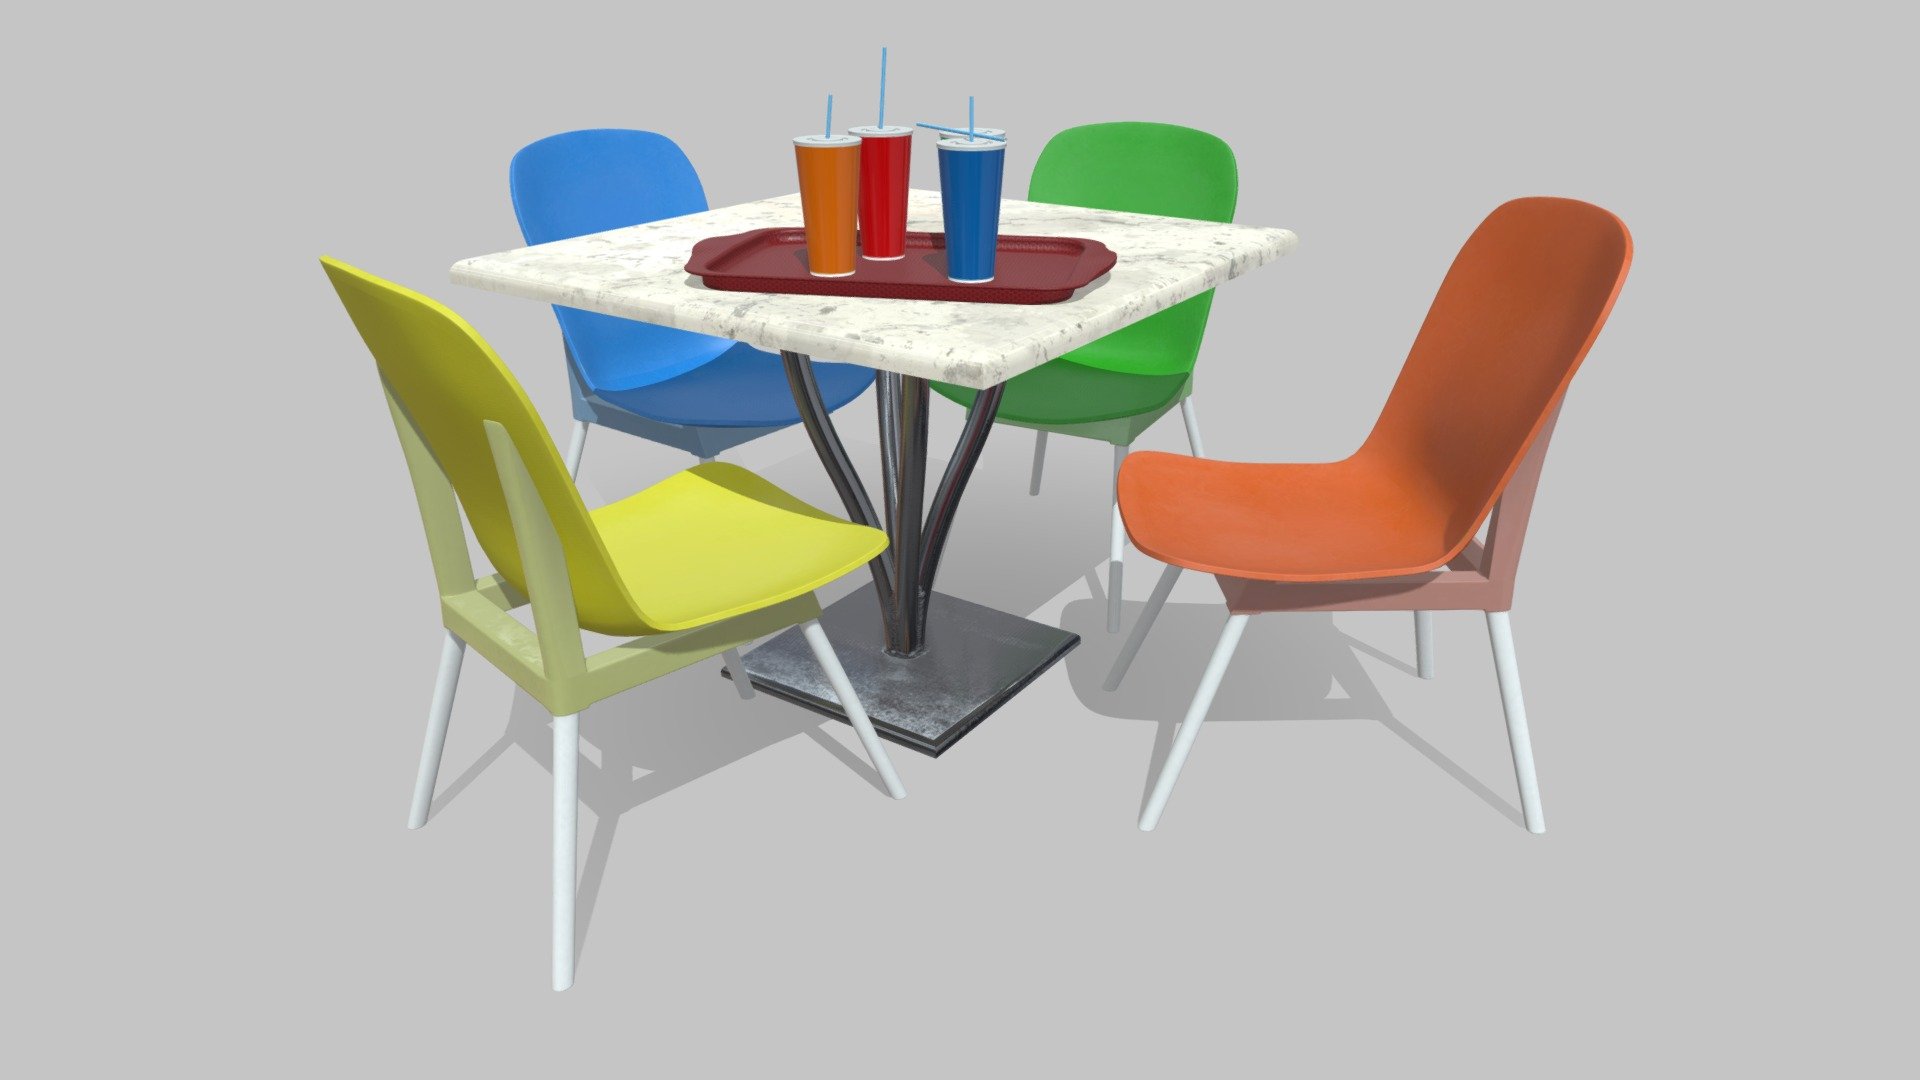 This is a model of the seats from the restaurant's cafe.

There are 1 table, 4 chairs, 1 tray, 4 glasses for cold drinks.

Including FBX, OBJ formats.

Additional file BLEND, SPP formats.

With BaseColor, Height, Metallic, Roughness, Normal, Opacity maps textures.

Low Poly.

Game development.

Design.

Interior.

The model is also useful for interior modeling, as a decorative item.


Table:

Vertices: 6896.

Edges: 13736.

Polygons: 6846.

Triangles: 13780.


Chair:

Vertices: 9920.

Edges: 19759.

Polygons: 9835.

Triangles: 19839.


Tray:

Vertices: 1804.

Edges: 3602.

Polygons: 1804.

Triangles: 3668.


Cup:

Vertices: 8915.

Edges: 17900.

Polygons: 8987.

Triangles: 17826.


All texture maps: 2048x2048.

Created in Blender and Substance Painter 3d model